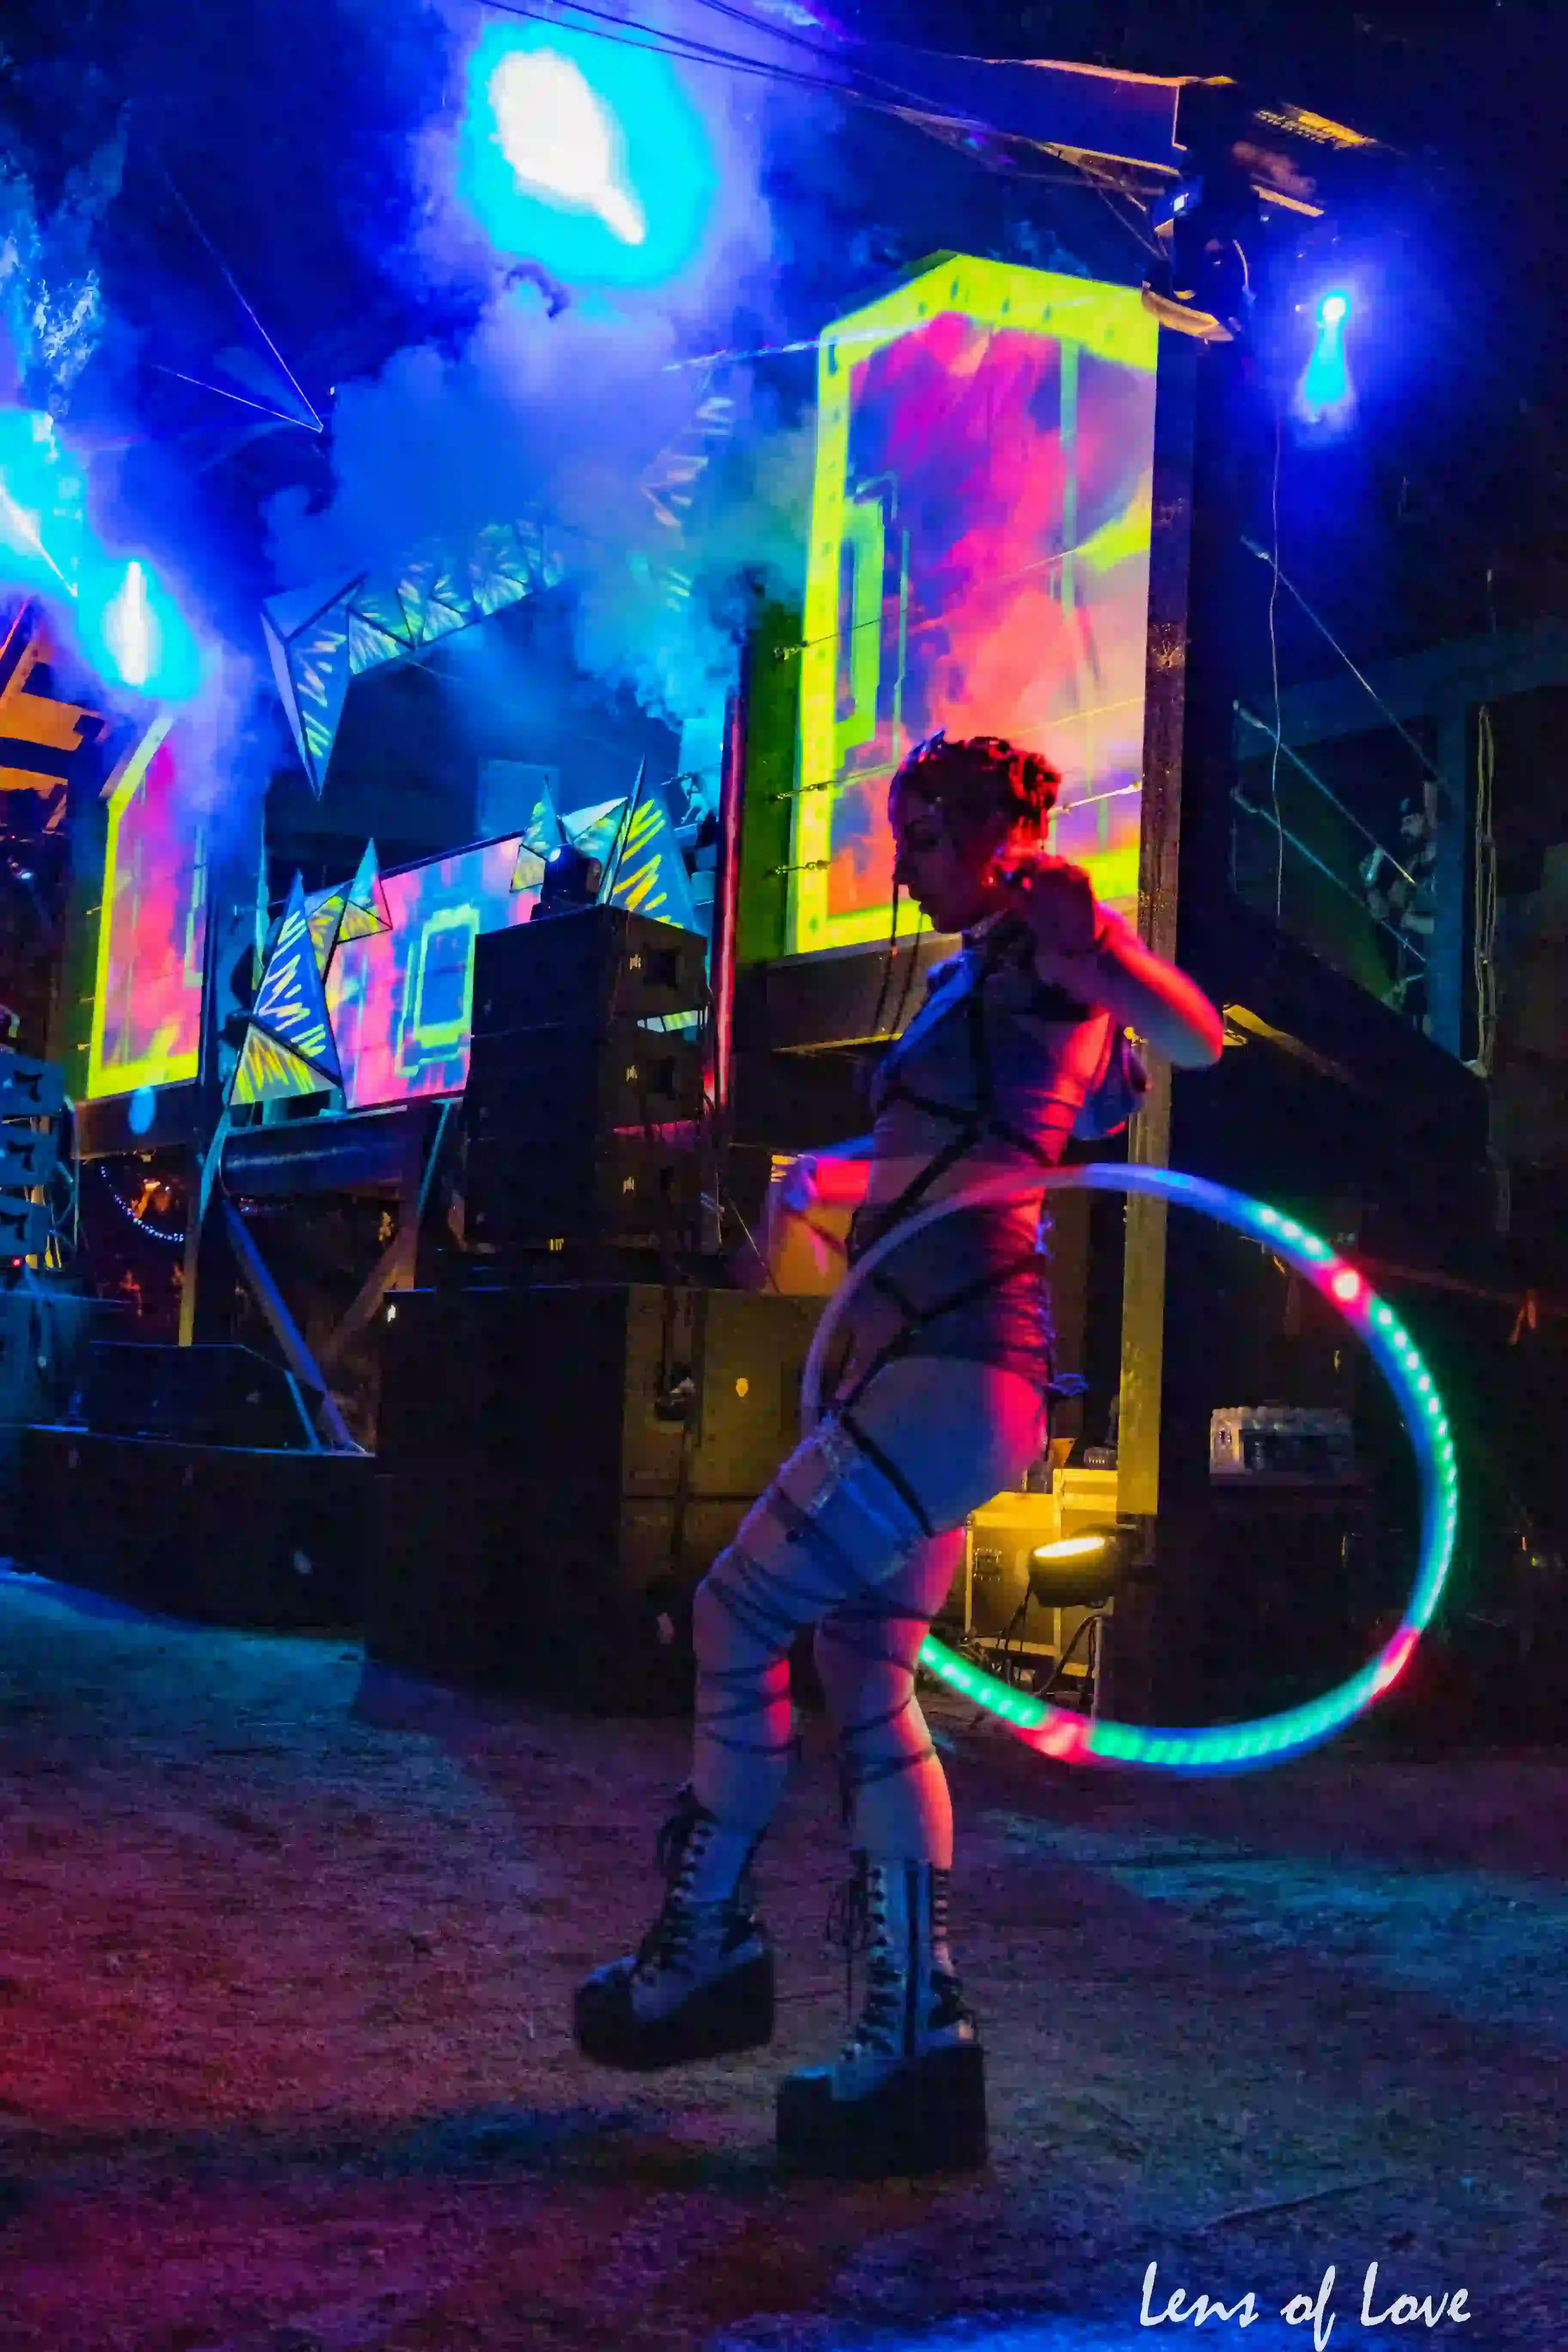 Performer hula hooping at ValhallaFest with colorful stage lights.